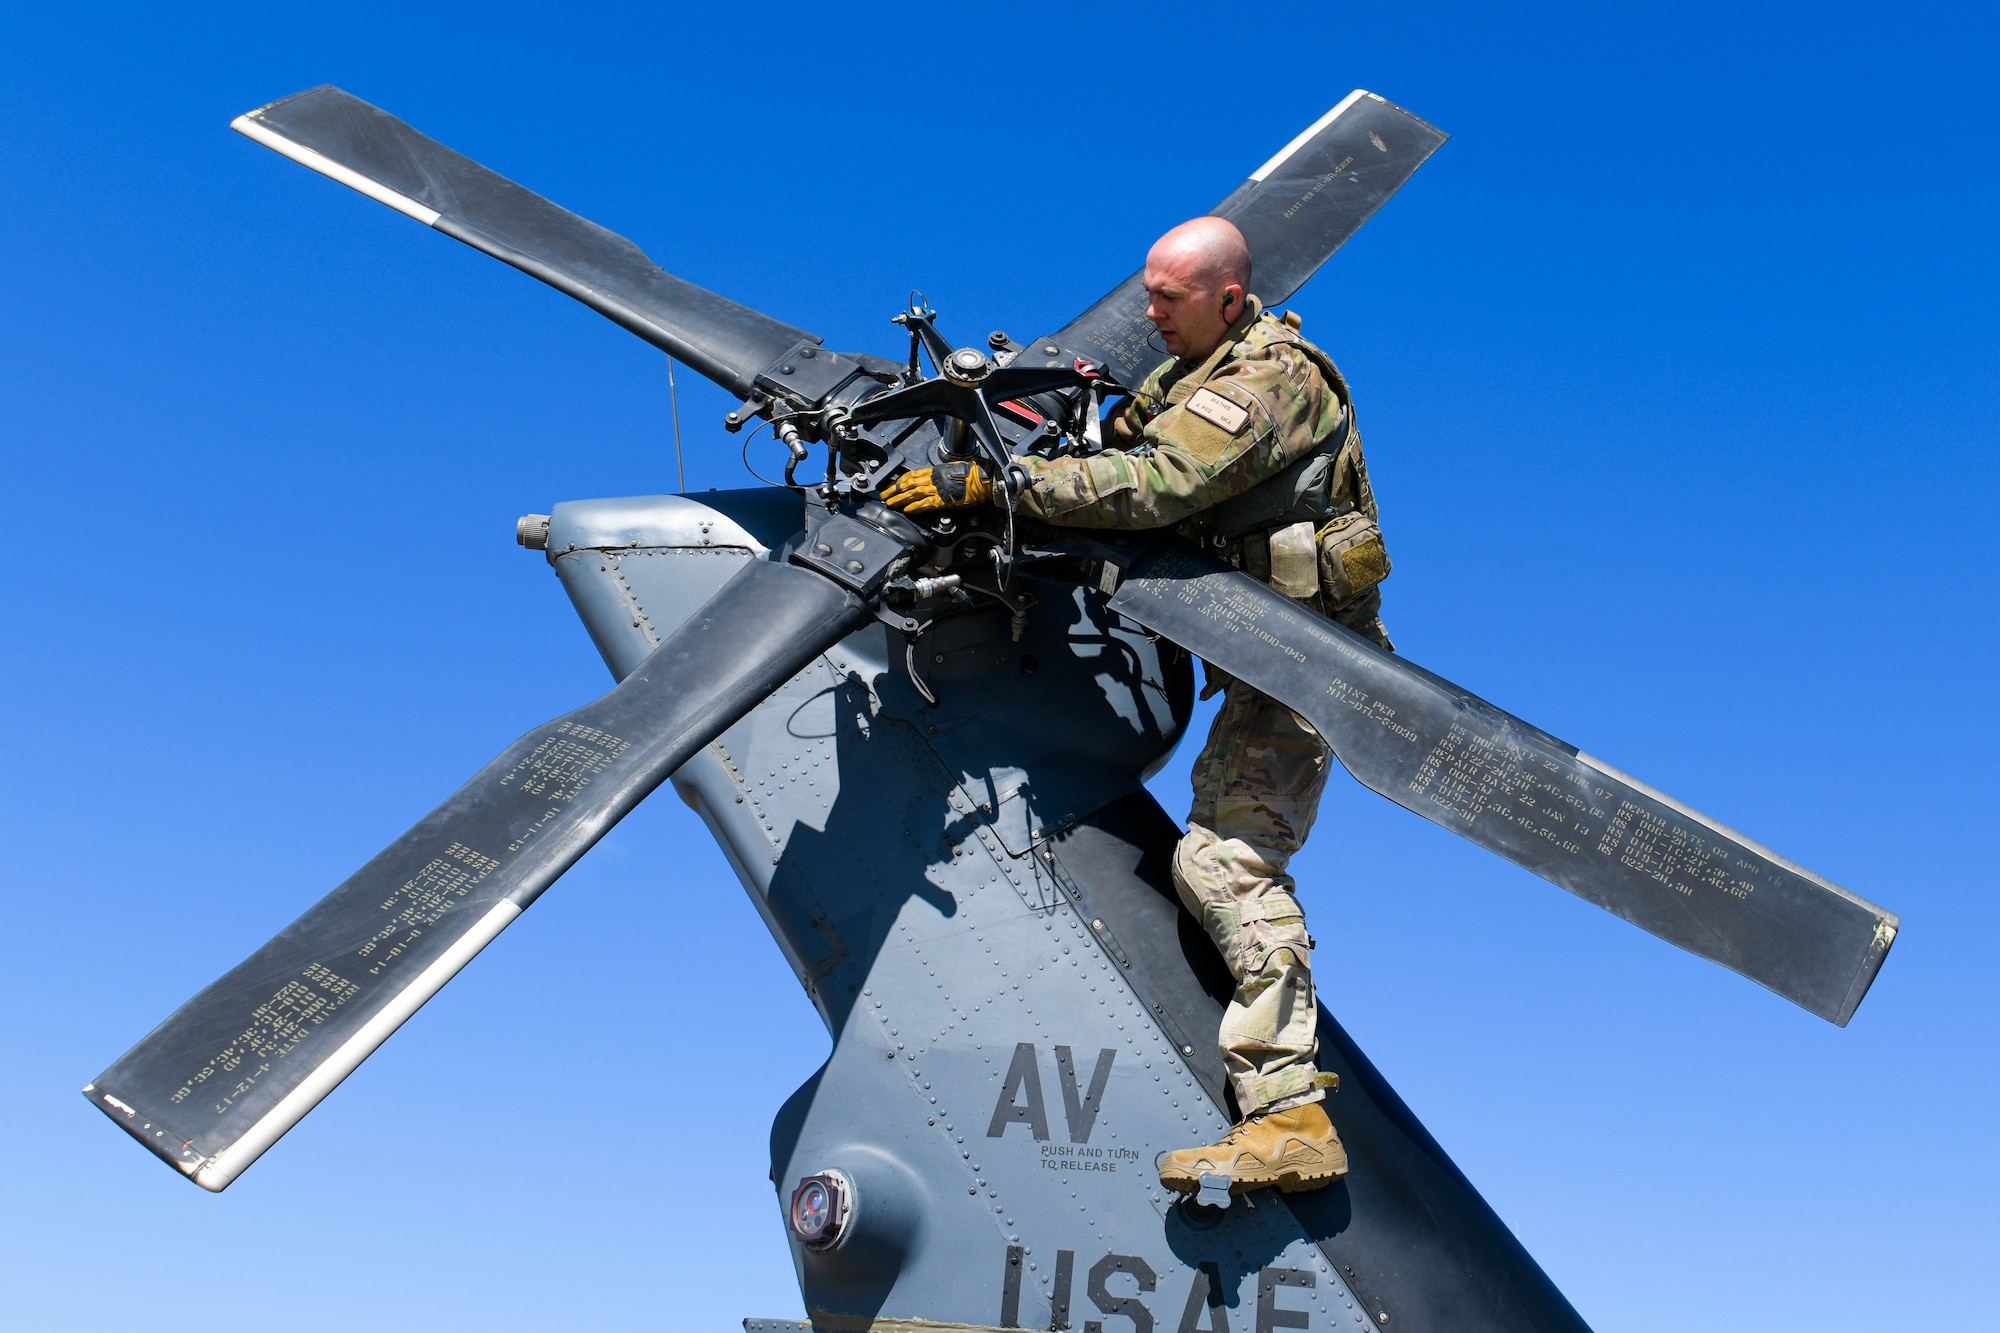 Tech. Sgt. William Mathis, 56th Rescue Squadron special missions aviator evaluator, inspects the blades on the tail rotor of an HH-60G Pave Hawk assigned to the 56th Rescue Squadron during a refuel stop in Croatia, Sept. 23, 2021. There are five helicopters assigned to the 56th RQS with two retiring by the end of 2021. The 56th RQS will receive more HH-60G models in February of 2022 to replace the two that retired. (U.S. Air Force photo by Senior Airman Brooke Moeder)